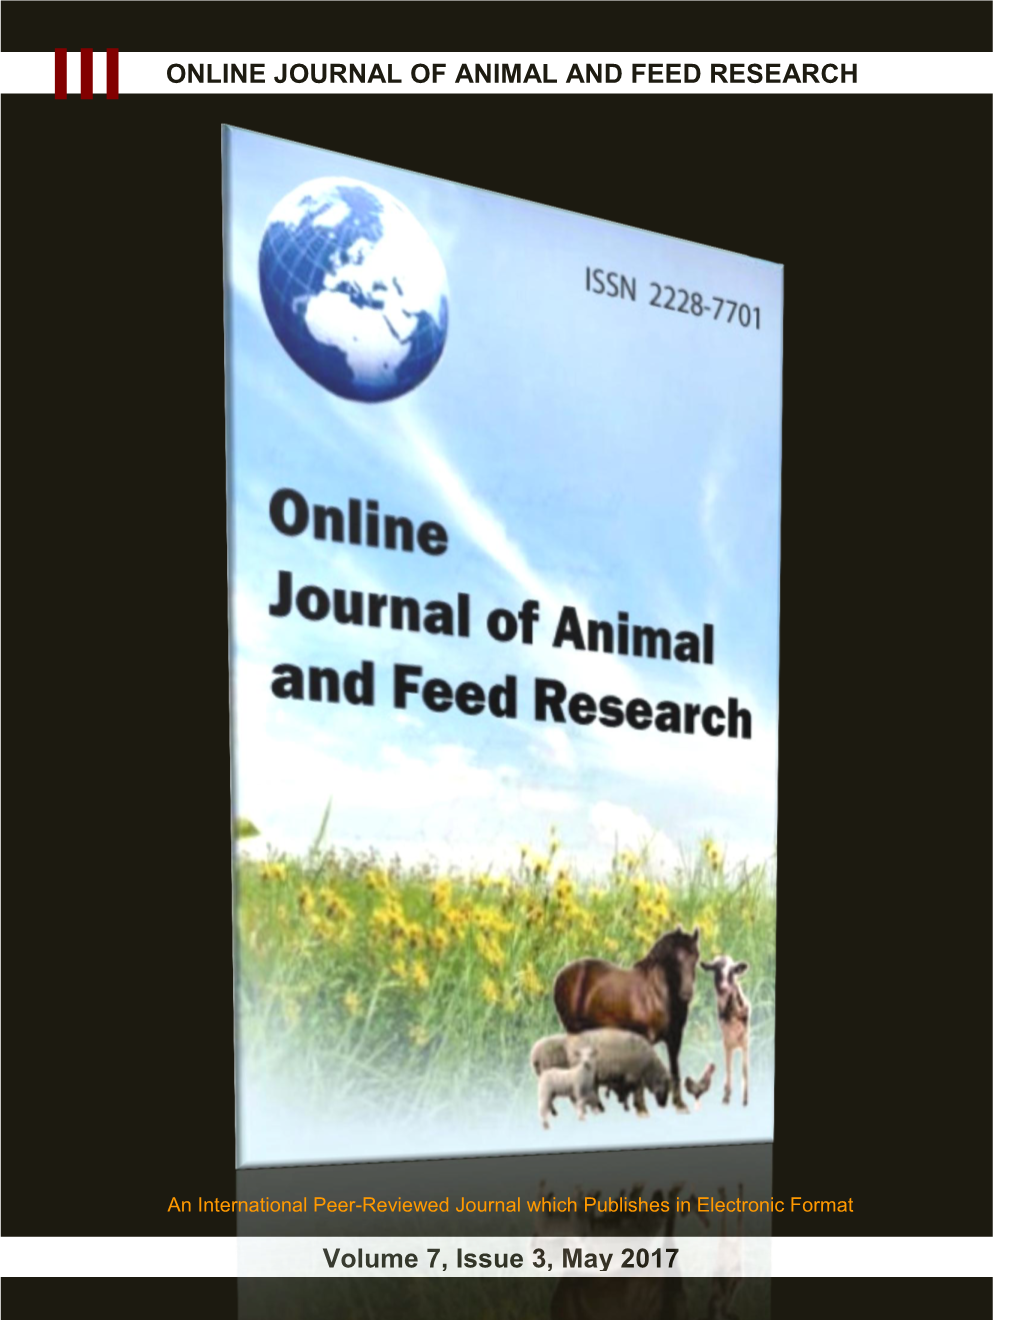 Online Journal of Animal and Feed Research